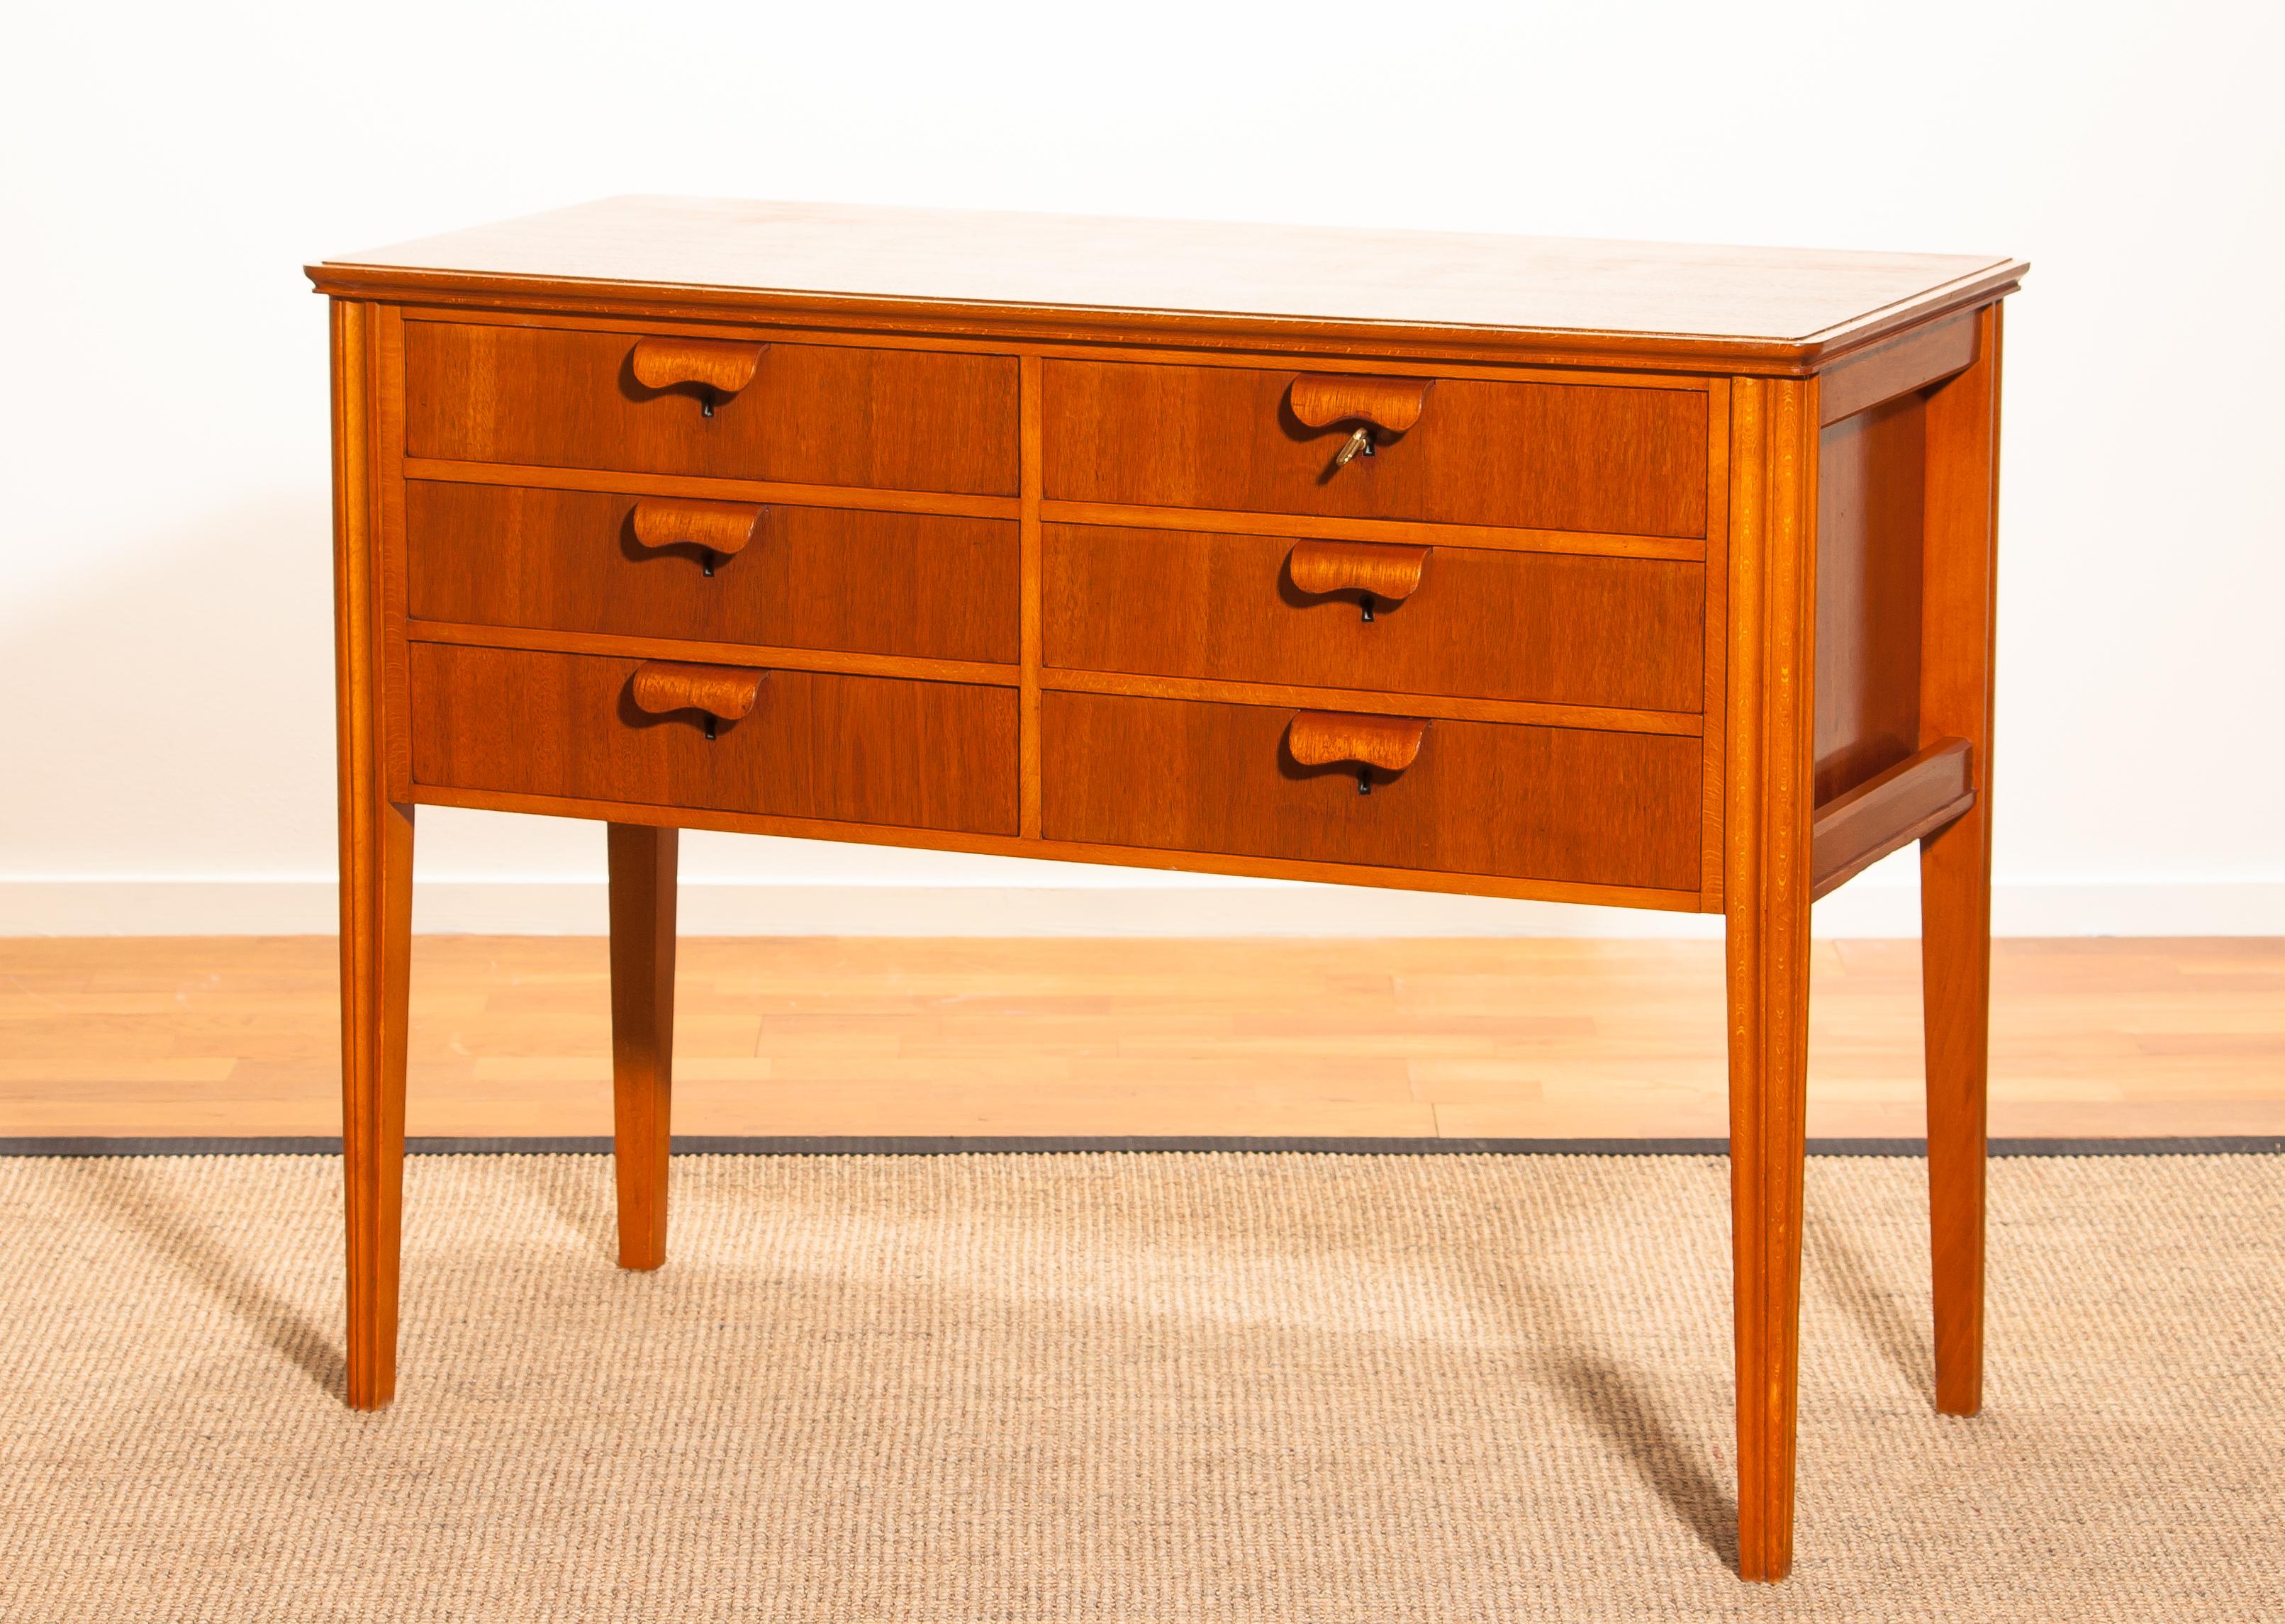 Beautiful chest of drawers made by Ferdinand Lundquist, Sweden.
This cabinet is made of teak and beech and has six drawers.
It is in excellent condition.
Period, 1950s.
Dimensions: H 72 cm, W 96 cm, D 43 cm.